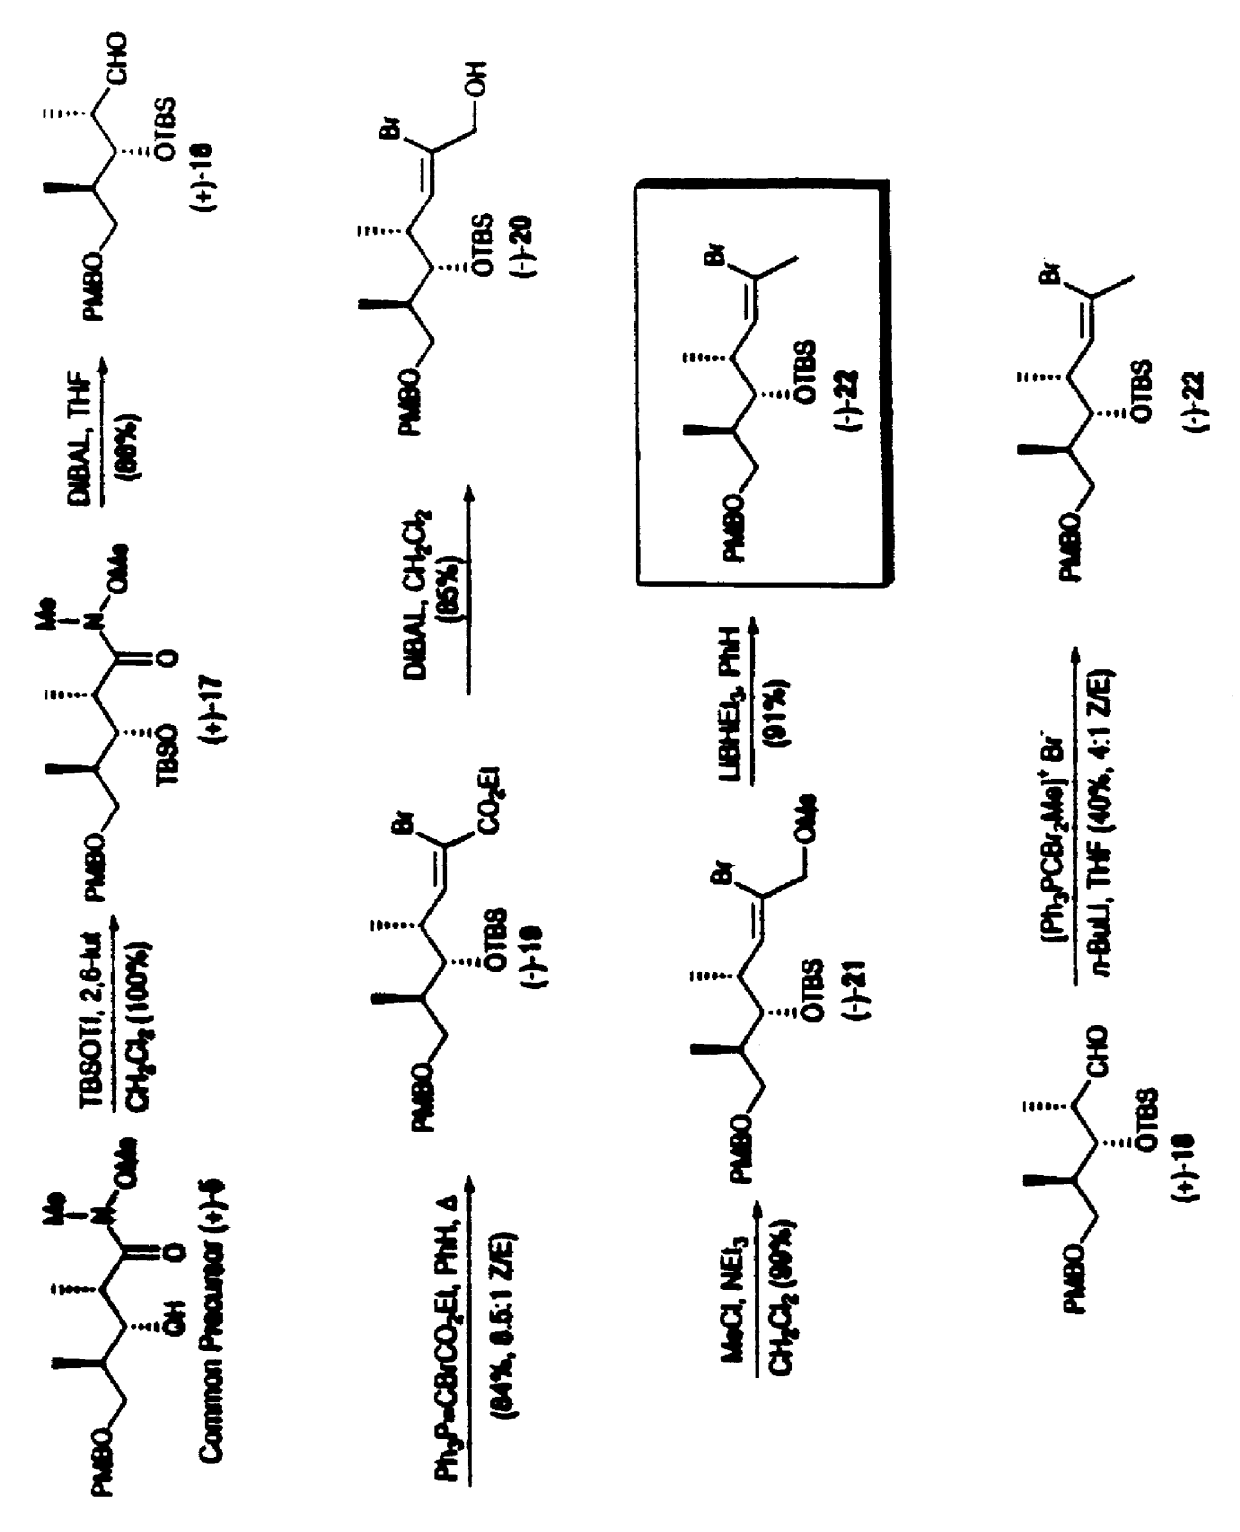 Synthetic techniques and intermediates for polyhydroxy, dienyl lactone derivatives